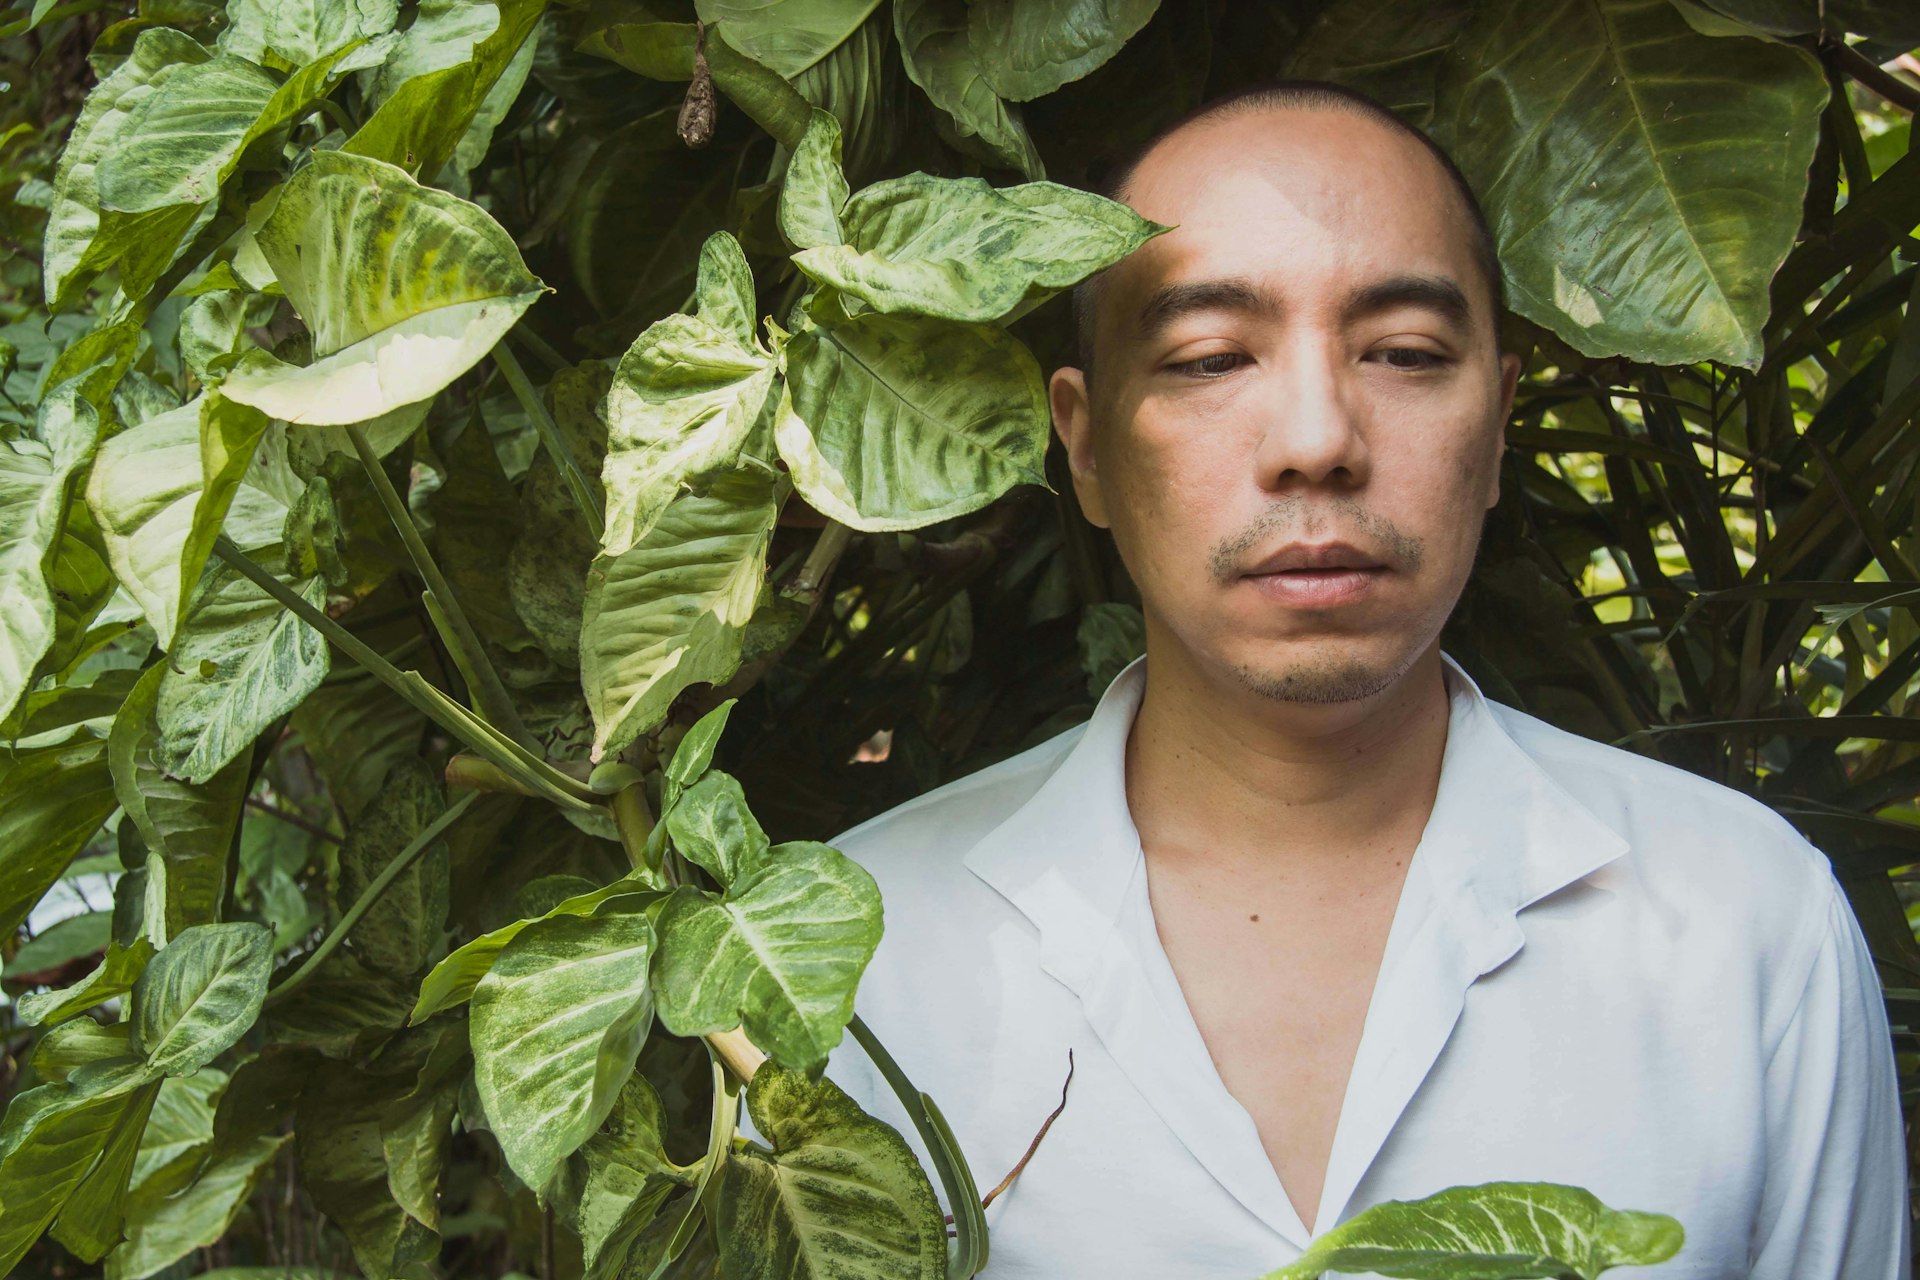 Apichatpong Weerasethakul on the future of film in Thailand